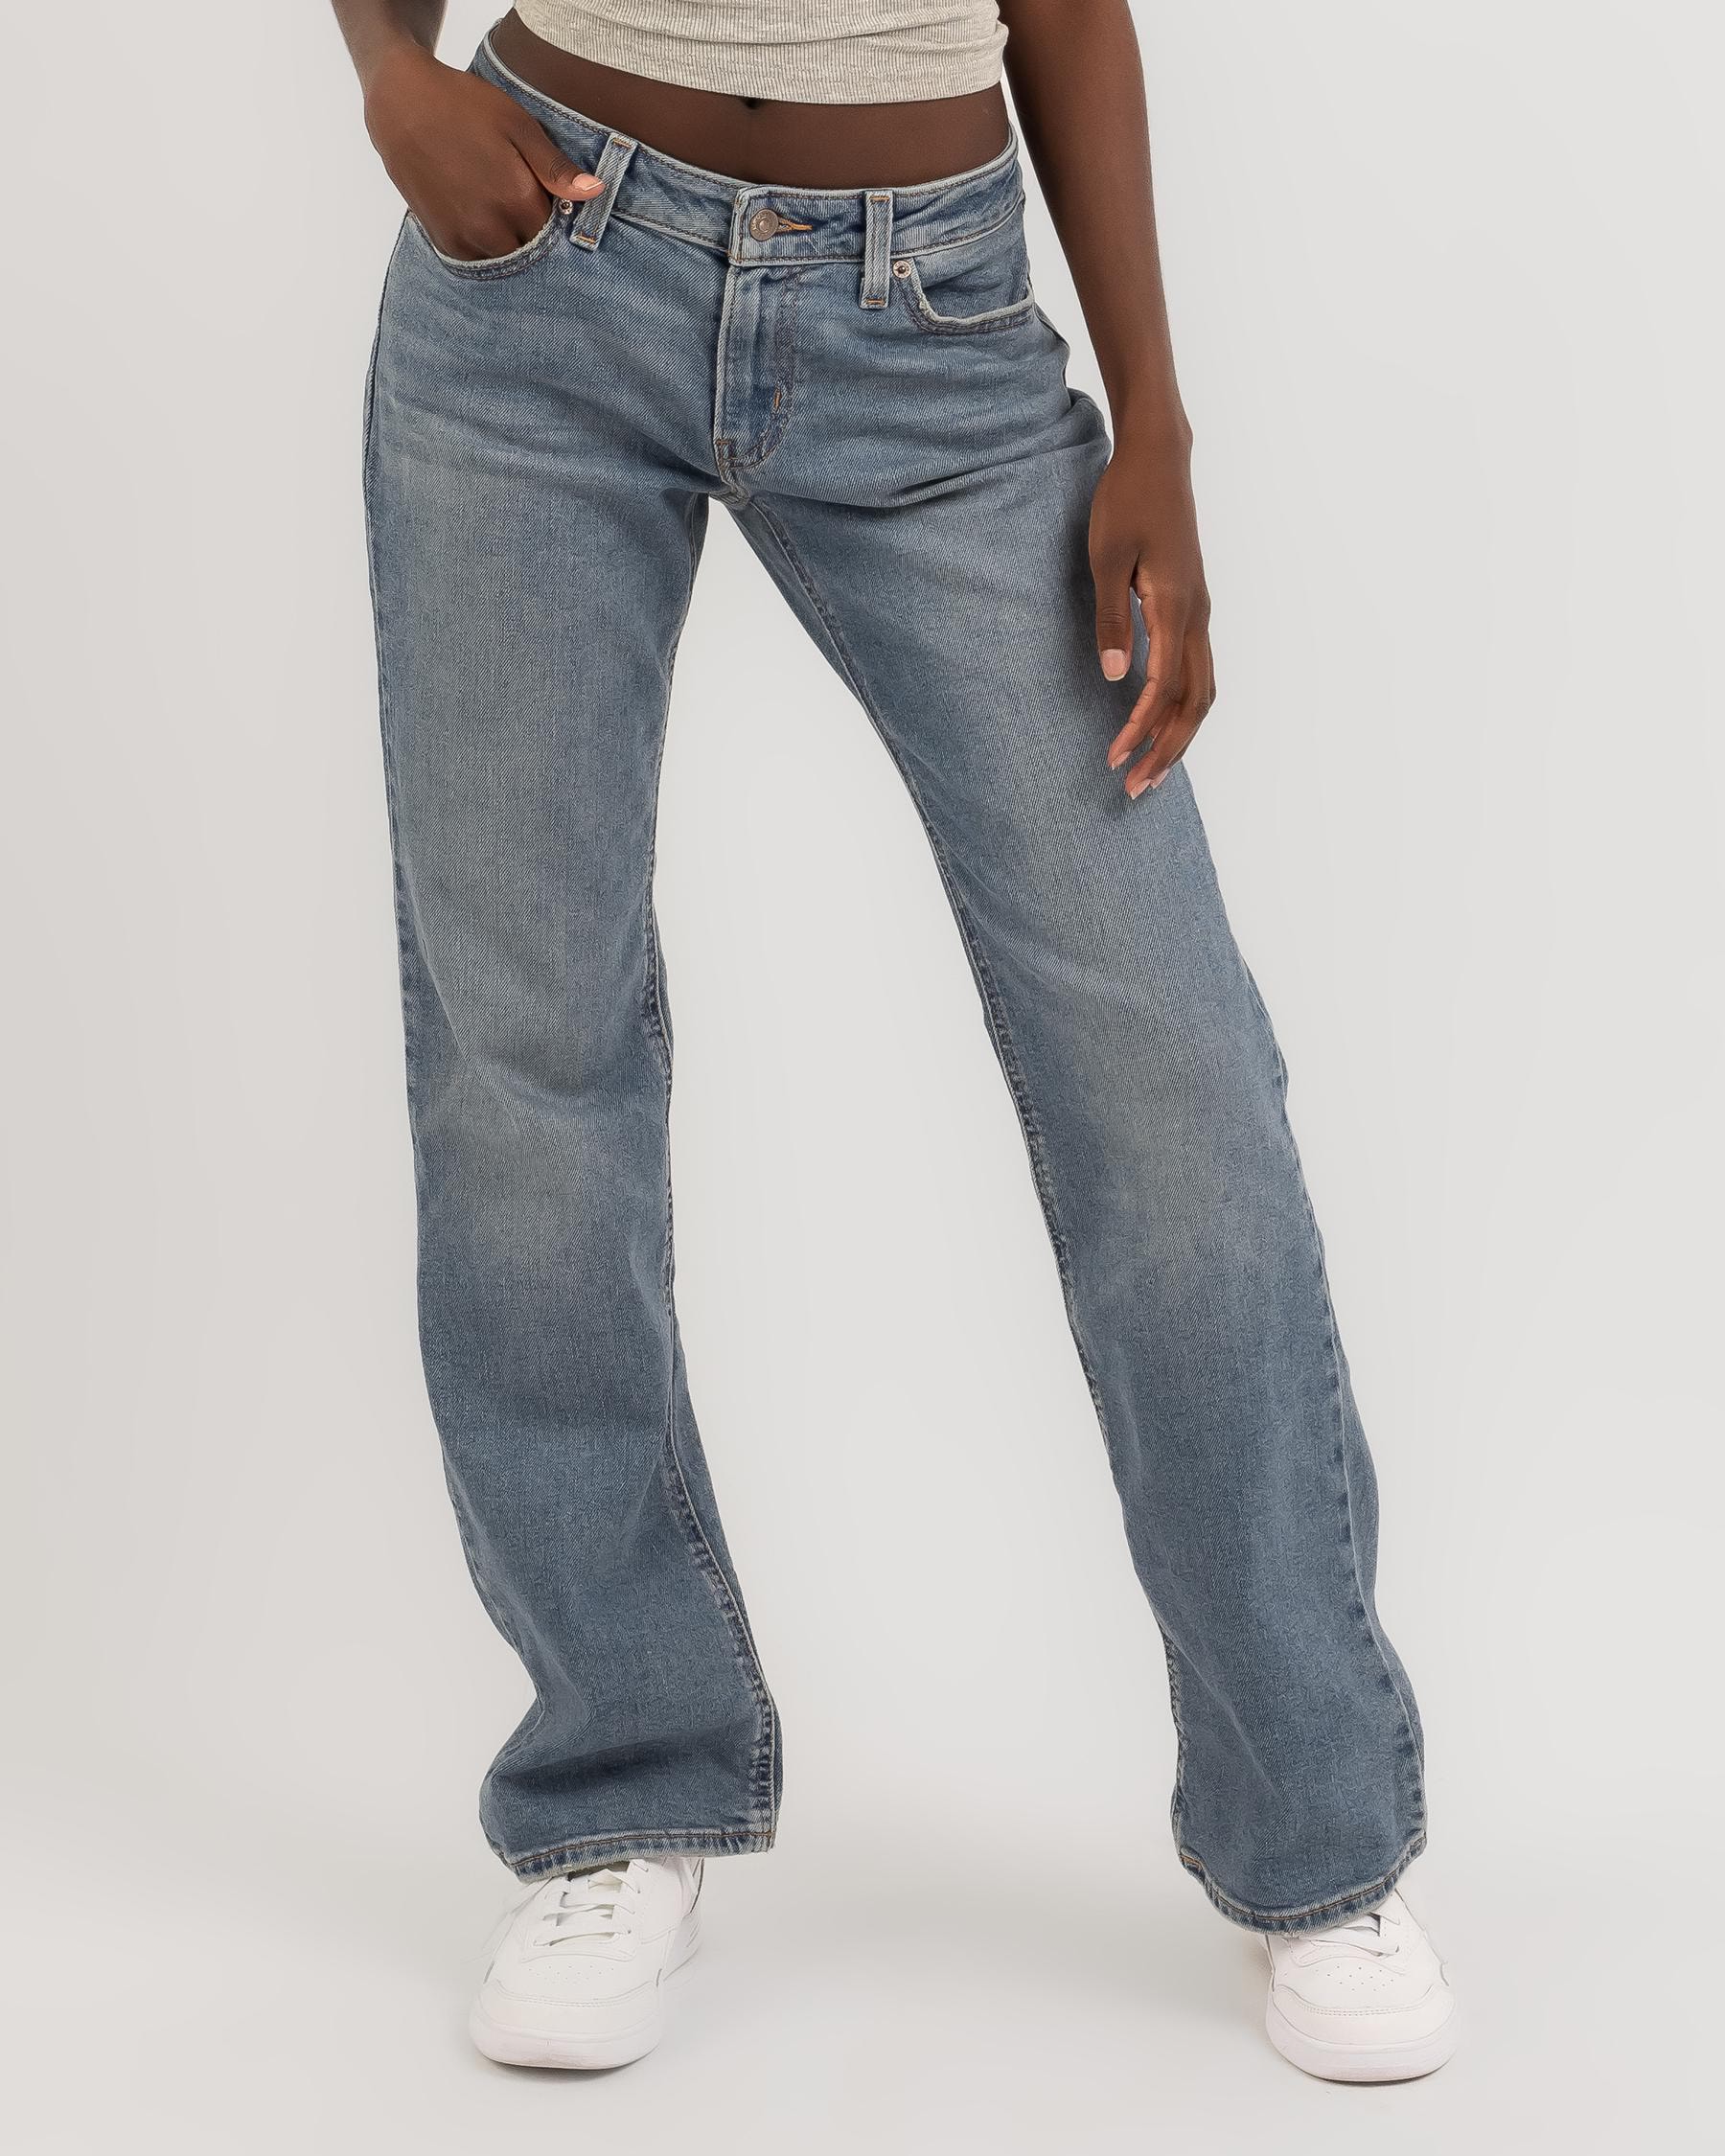 Levi's Super Low Boot Jeans In Hydrologic - Fast Shipping & Easy ...